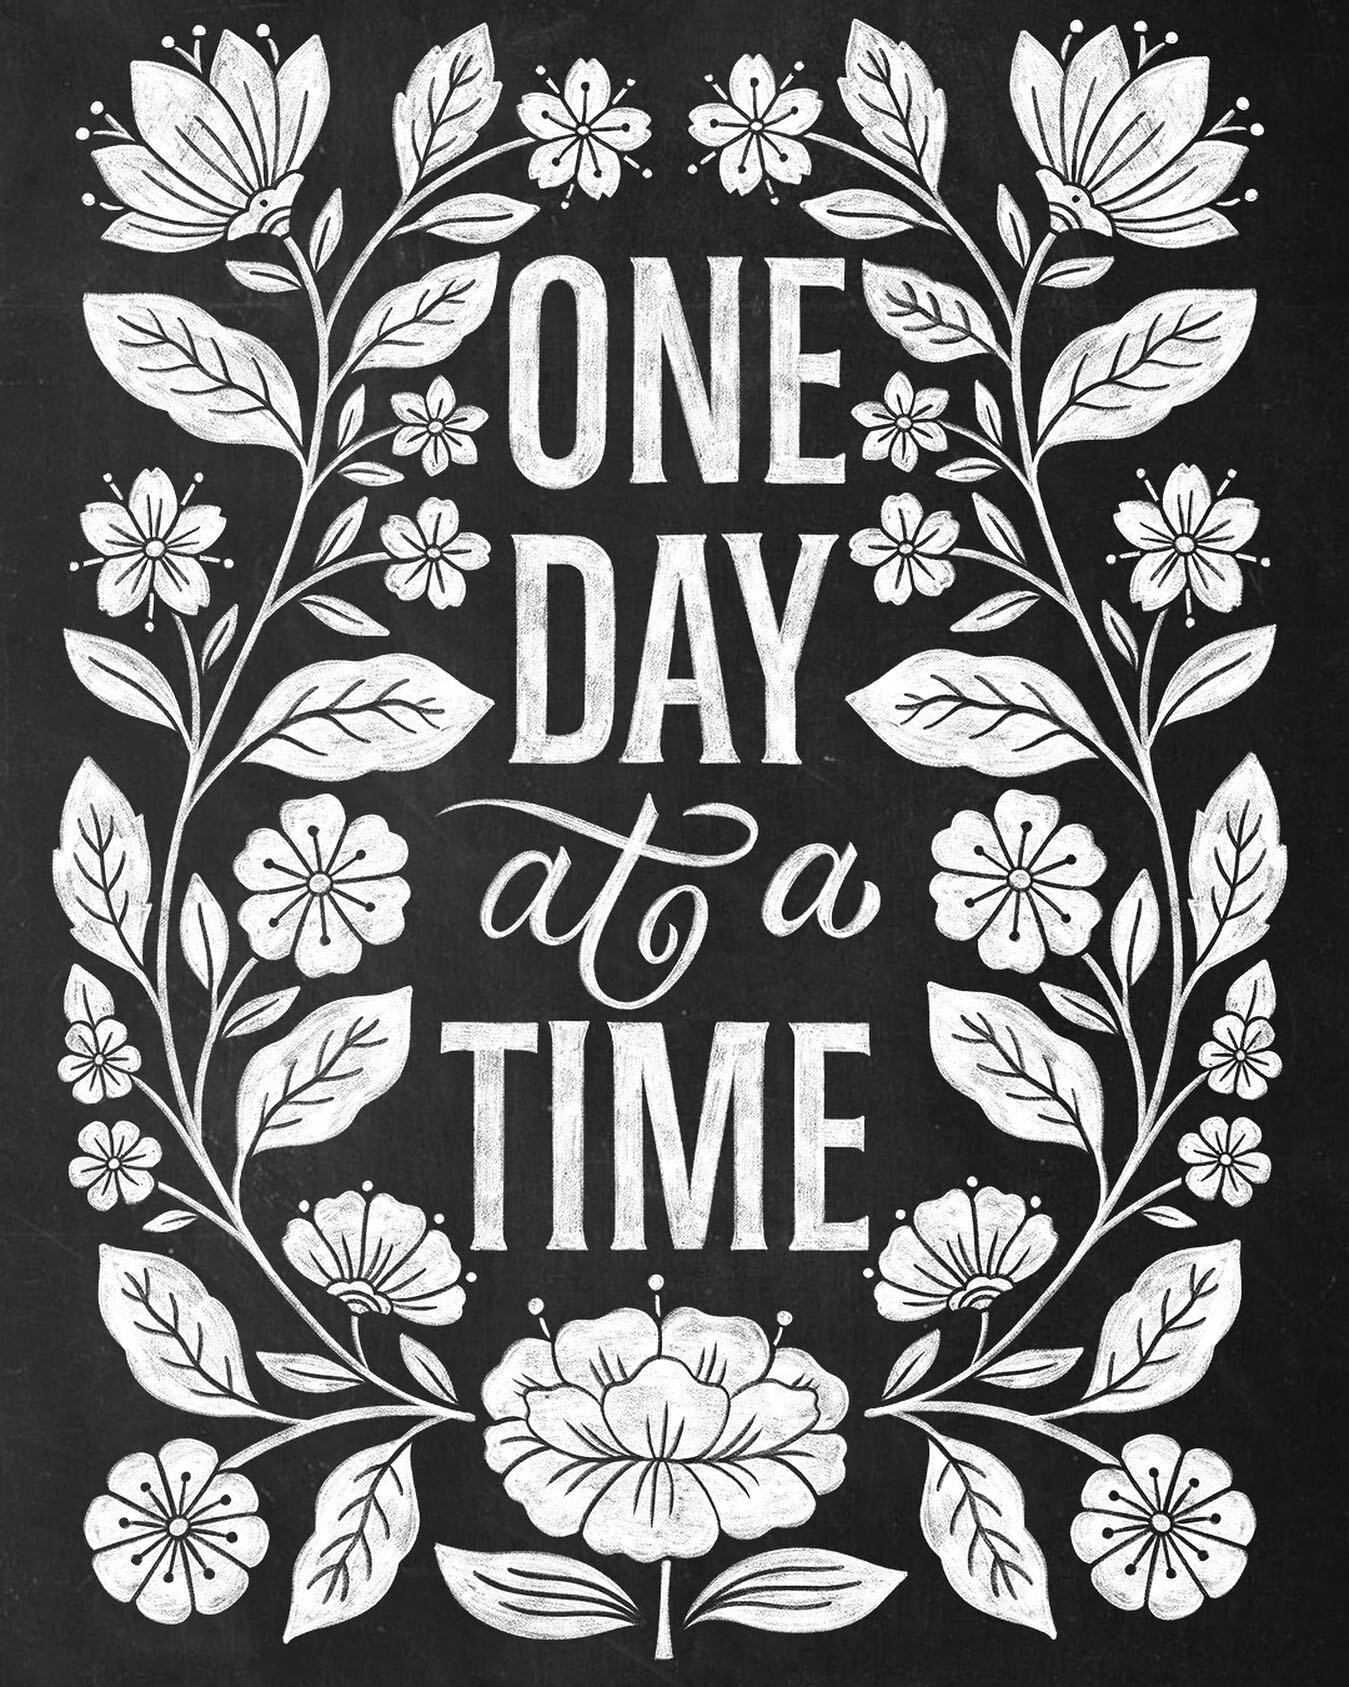 ⚡️One Day at a Time⚡️
.
.
.
🌿This is my mantra for 2020 and my submission for this week&rsquo;s Goodtype Tuesday Challenge! A teacher first said this to me in fifth grade when I was scared to go to sleep away camp (&ldquo;Take it one day at a time&r